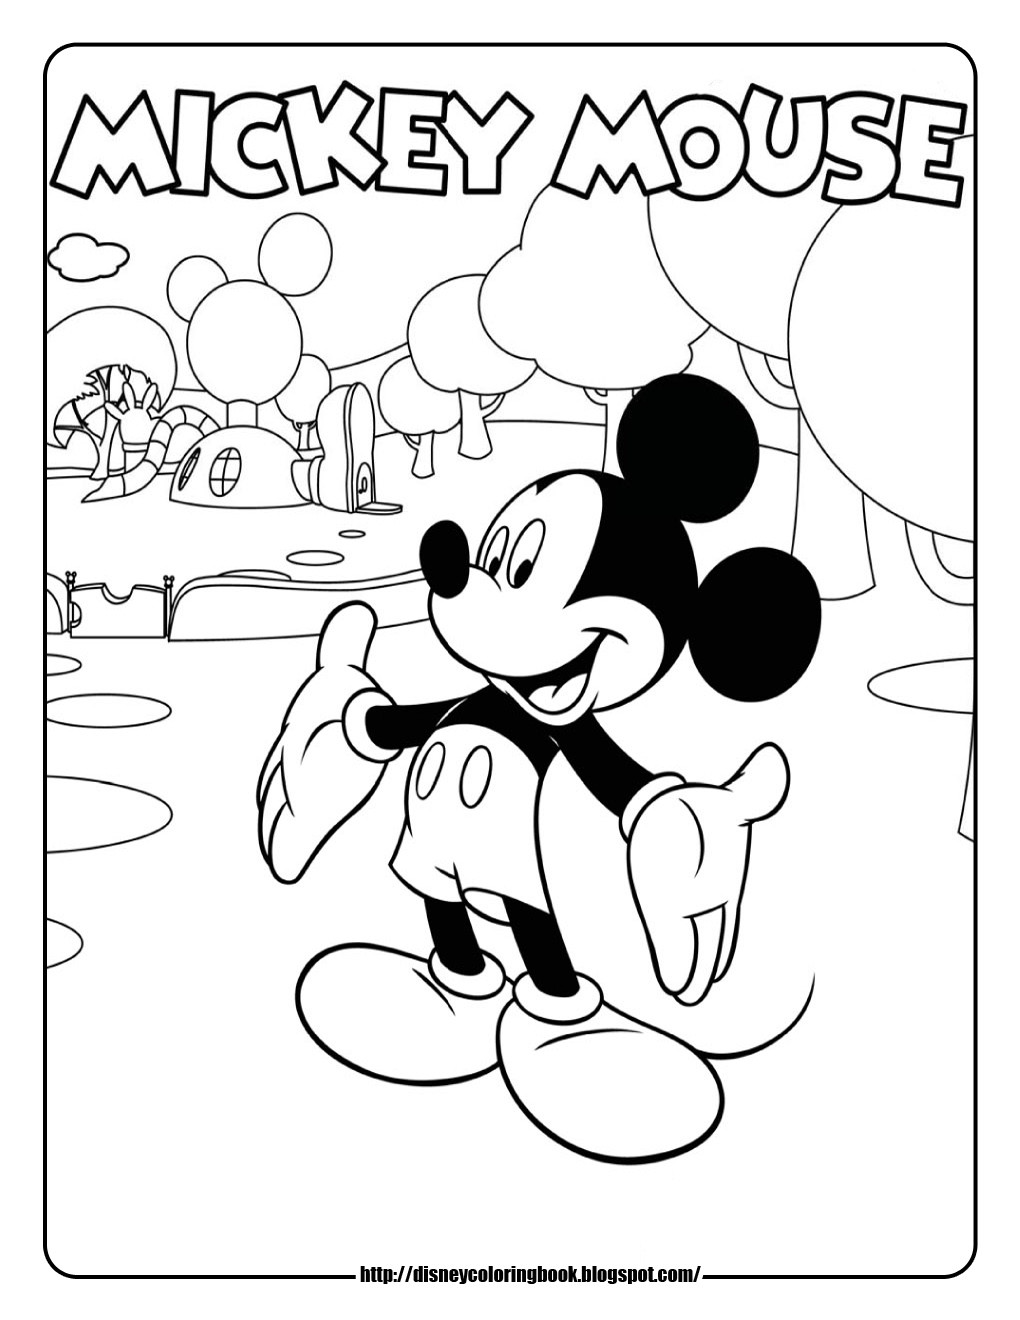 Mickey Mouse Clubhouse Printable Coloring Pages
 Mickey Mouse Clubhouse 1 Free Disney Coloring Sheets